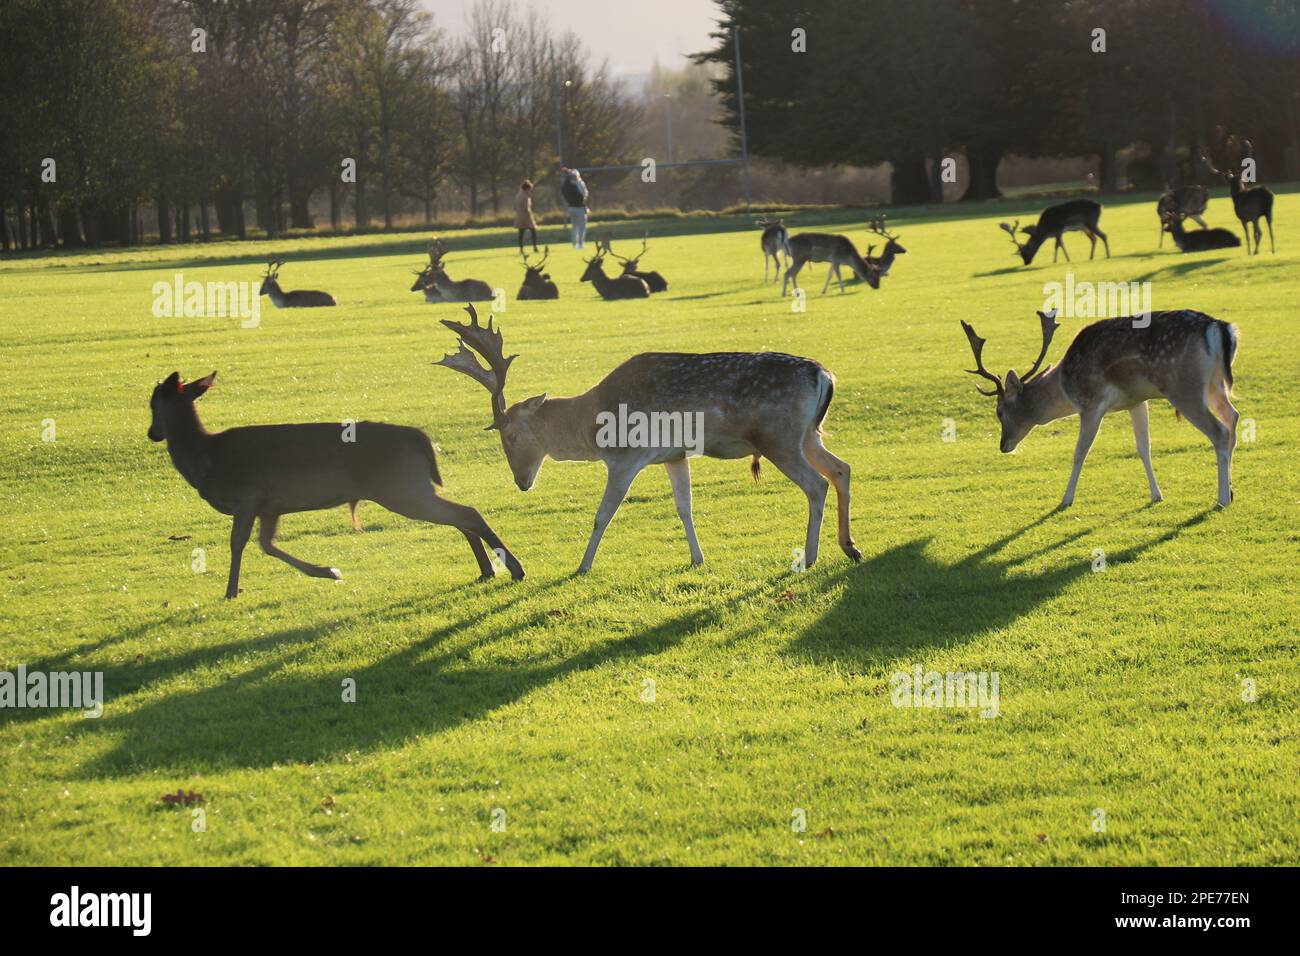 Amidst the tranquil beauty of an Irish park, a graceful deer stands and plays, embodying the serene essence of Ireland's captivating wildlife Stock Photo